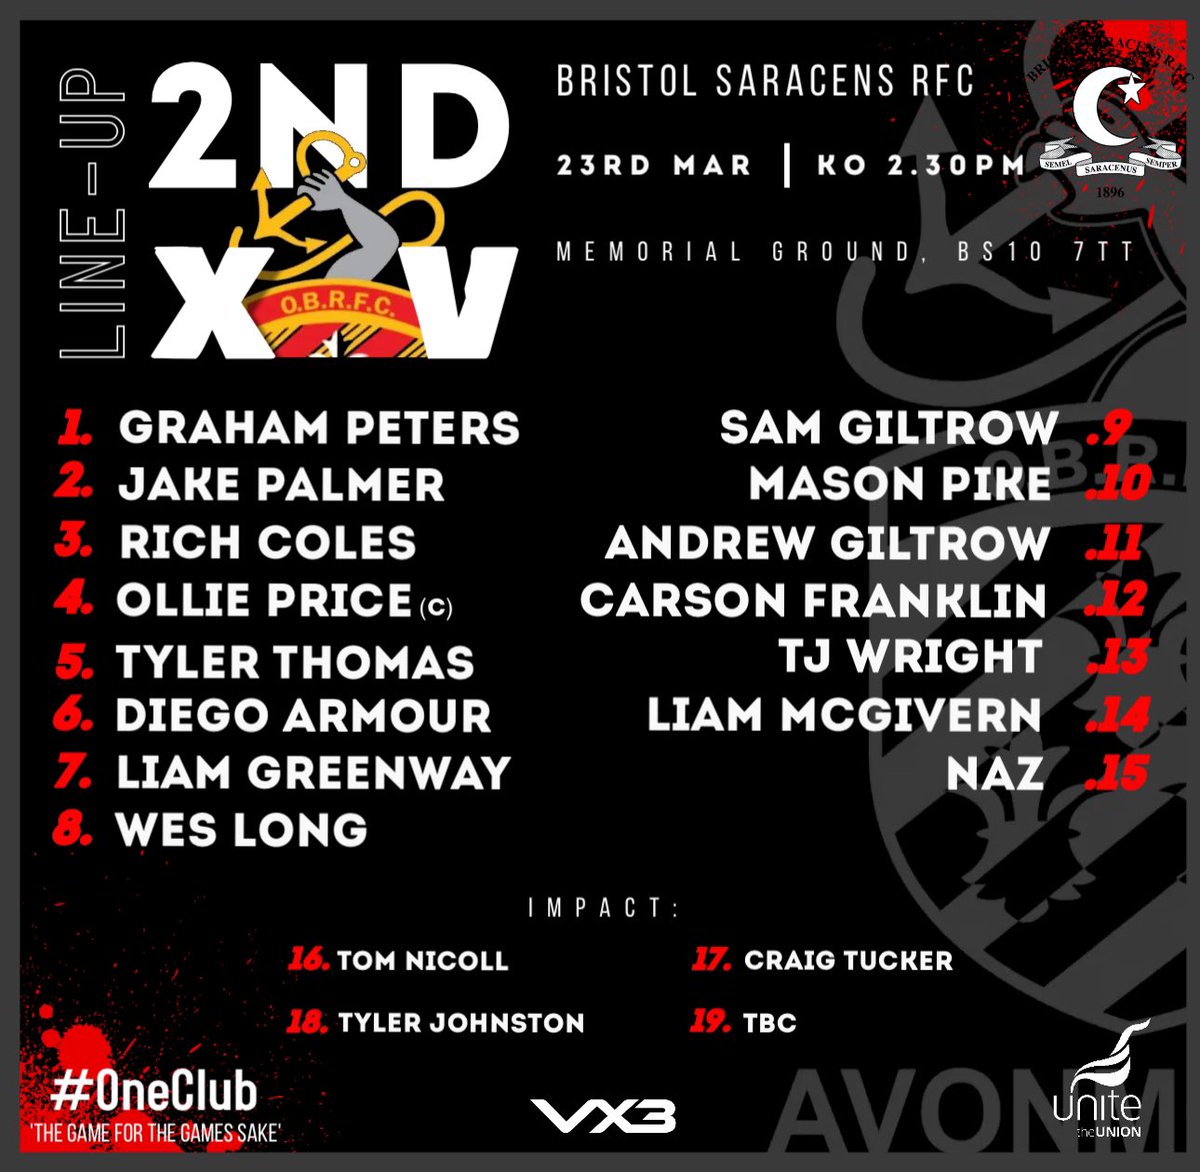 SQUAD ANNOUNCEMENTS⤵️ Here’s our senior men’s squads for this weekends fixtures. The 1st XV play their final home league fixture of the season. ⚫️🔴⚫️ @GRFUrugby @swsportsnews